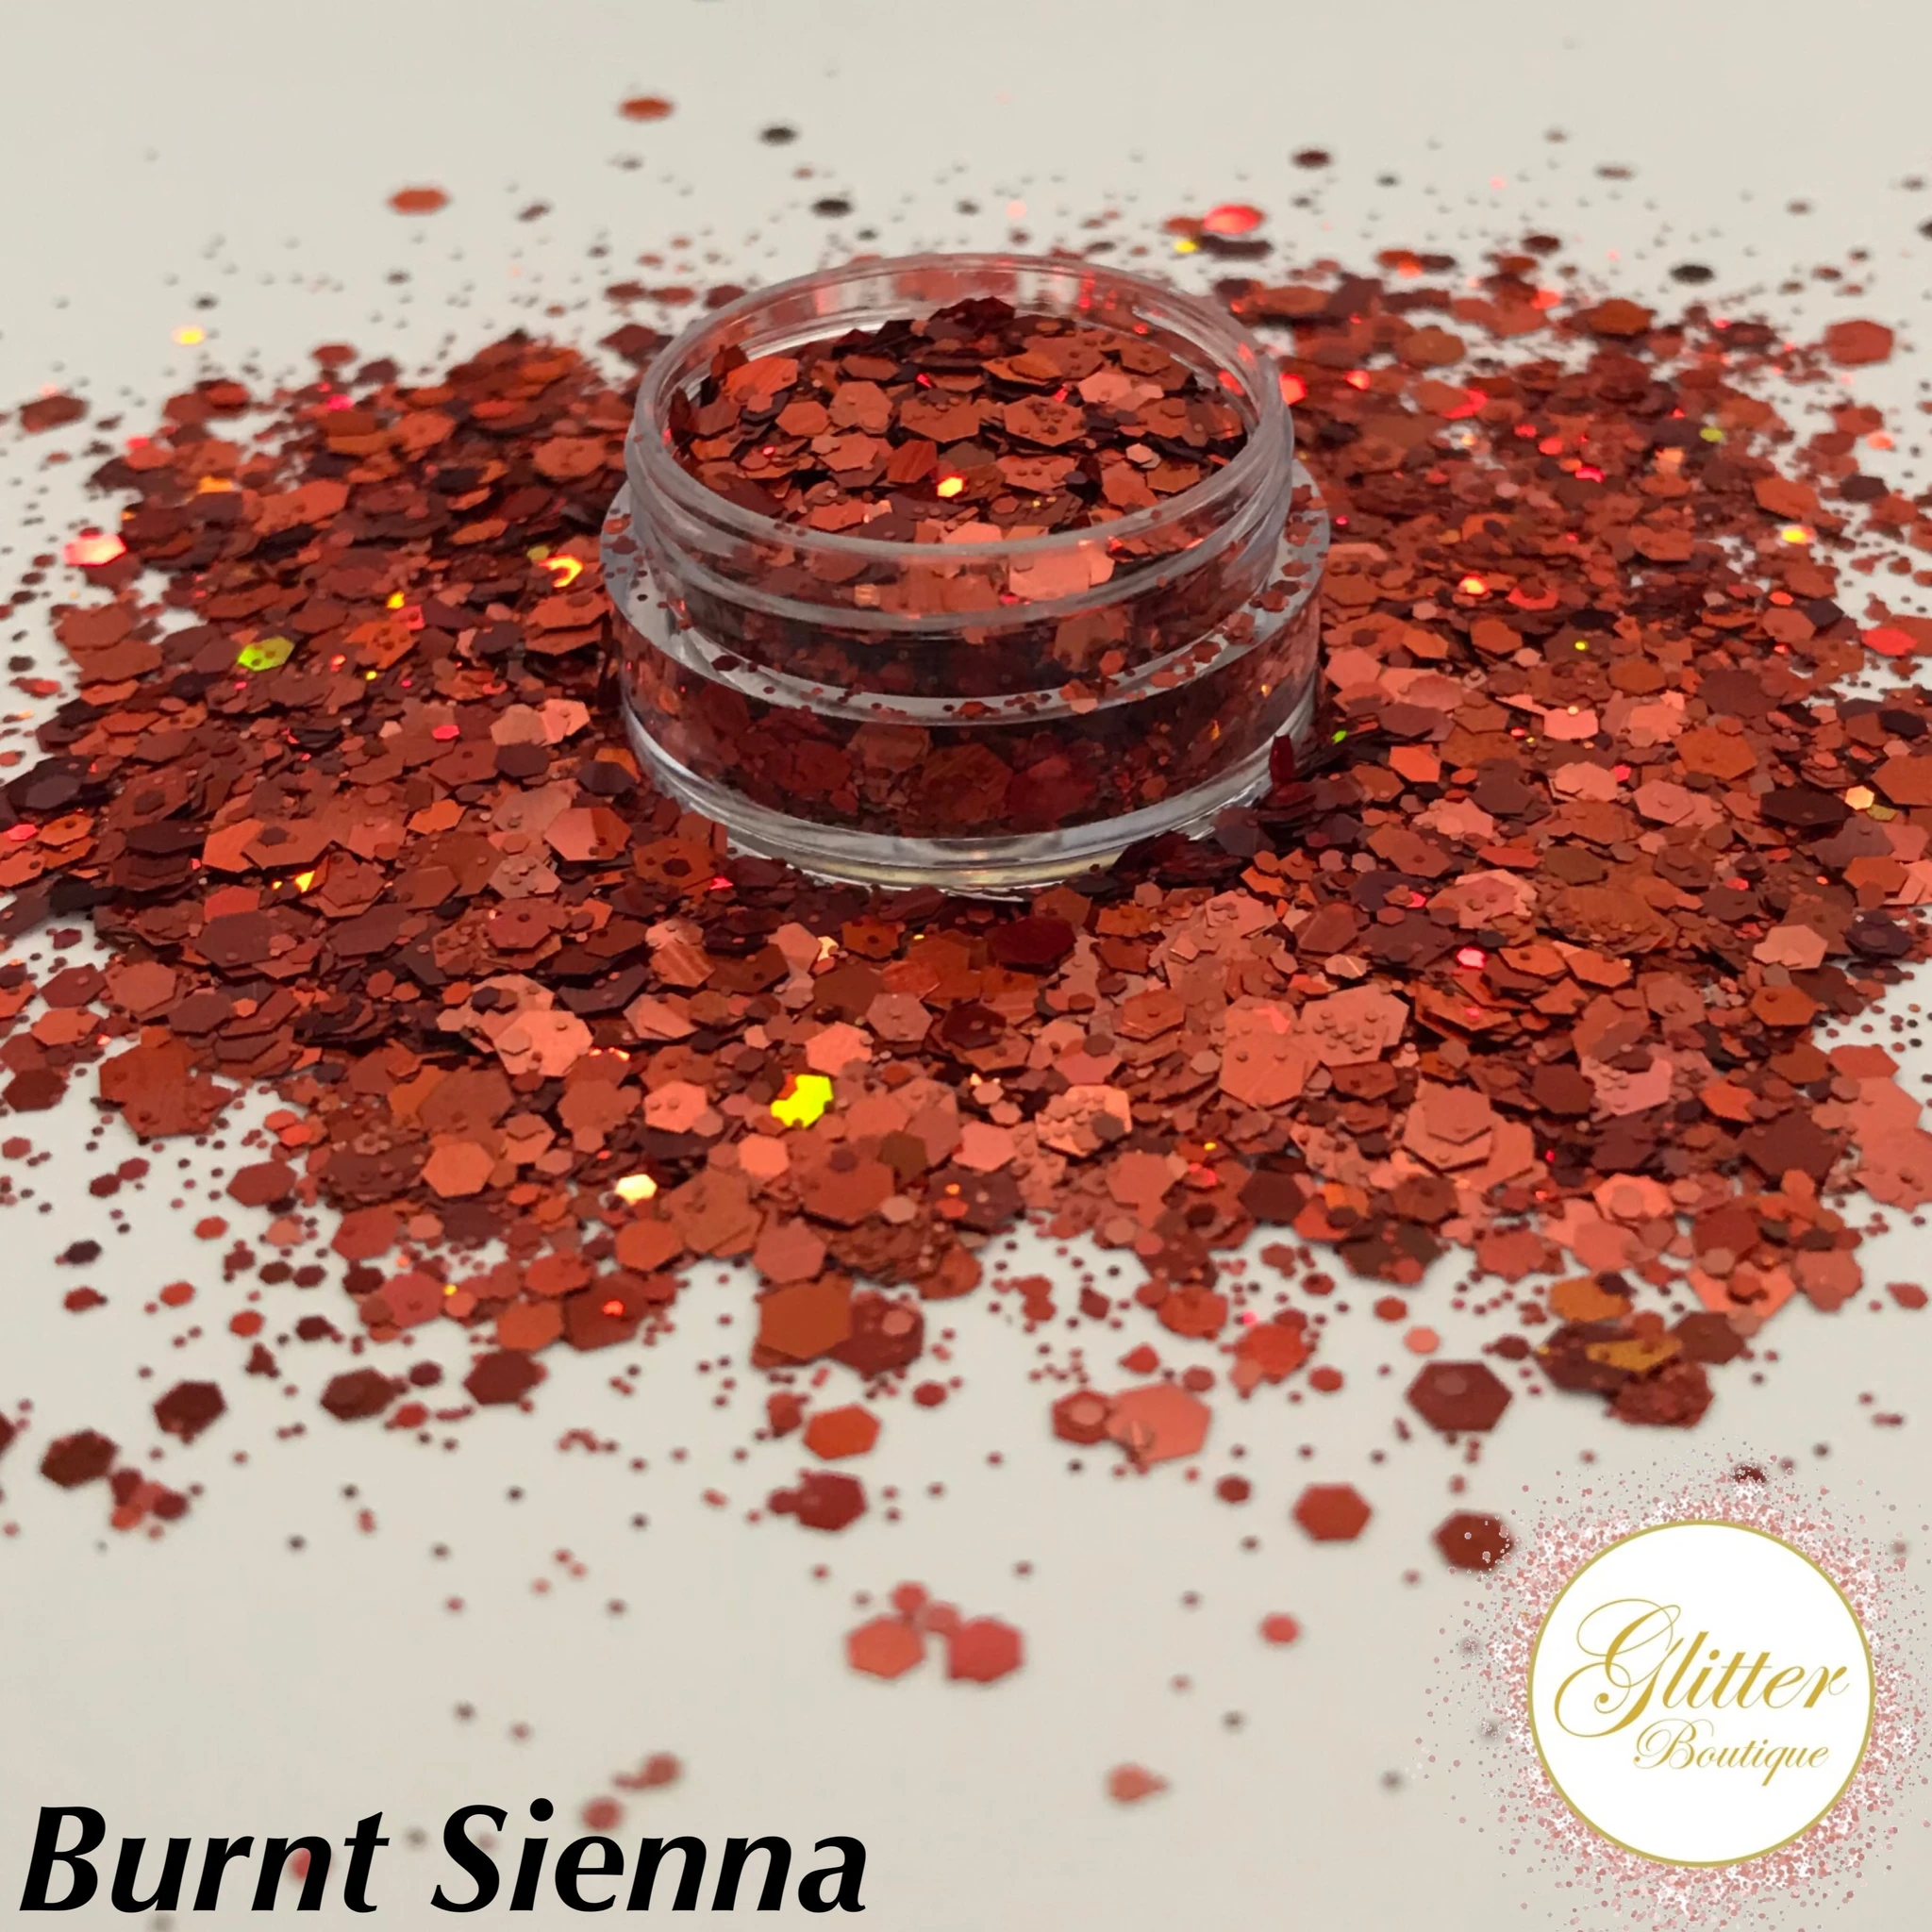 Glitter Boutique - Burnt Sienna - Creata Beauty - Professional Beauty Products